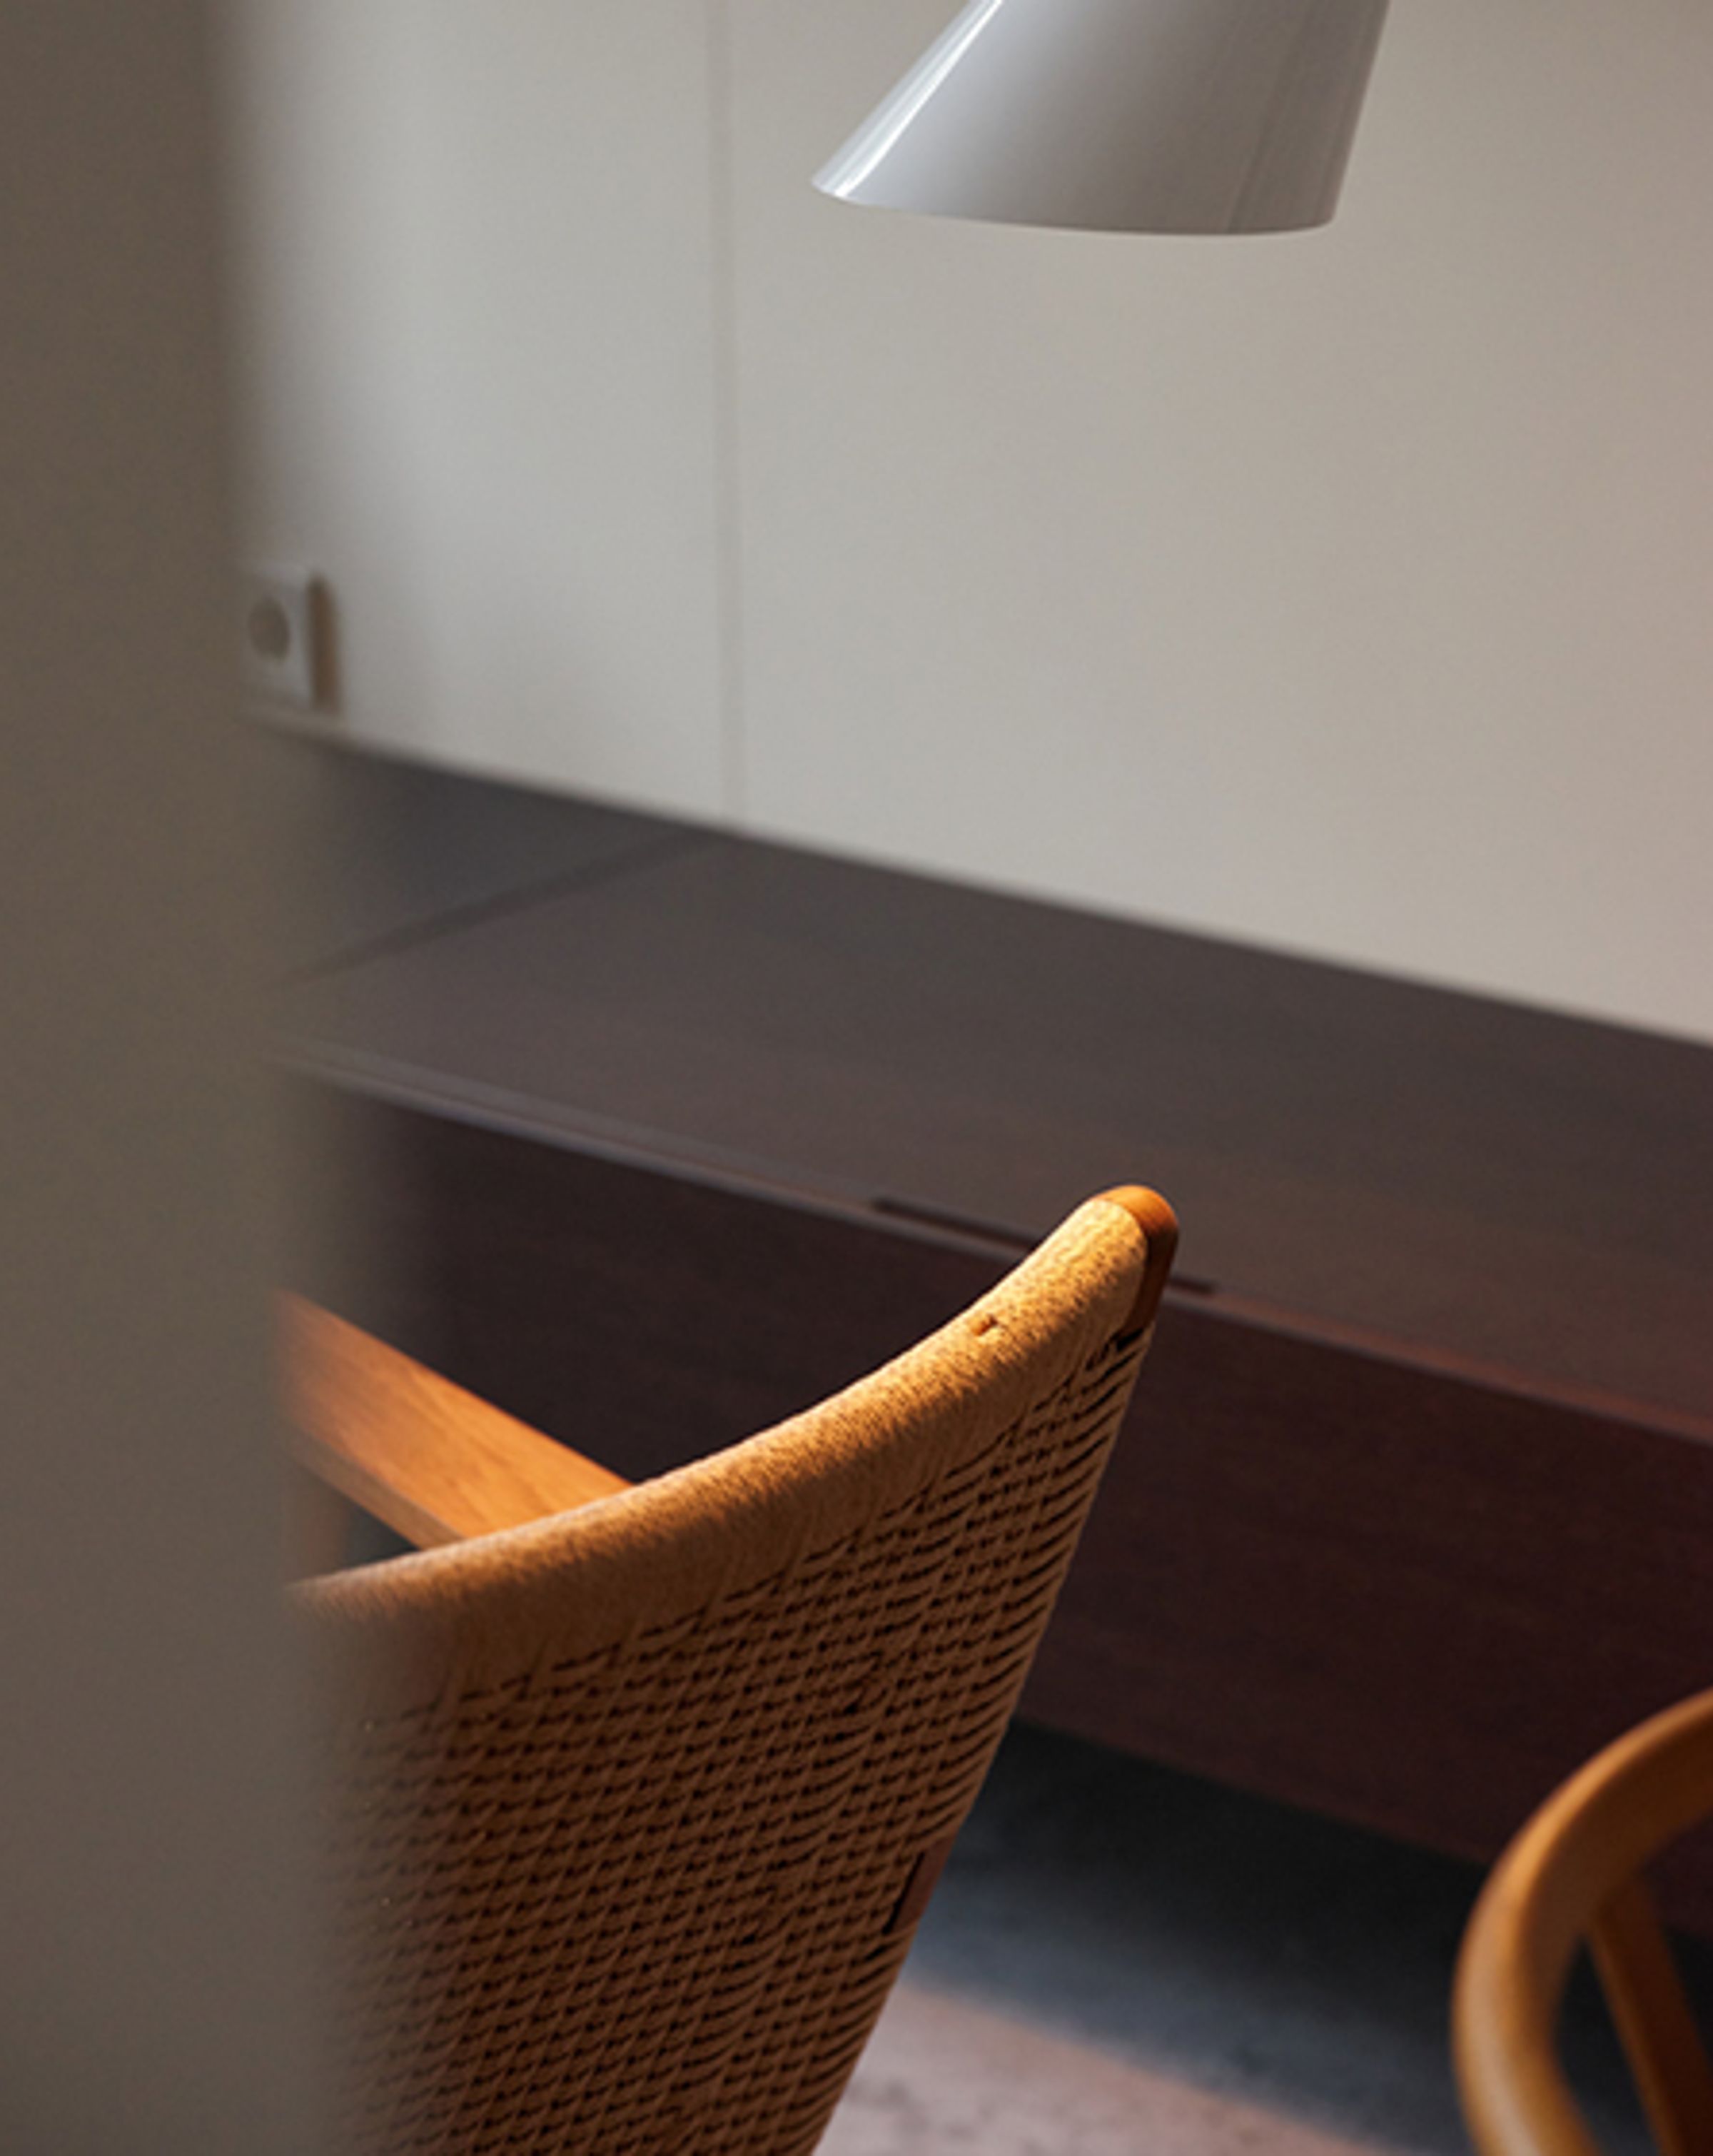 The back of an orange chair in the foreground with low wooden cabinetry in the background and a desk lamp above